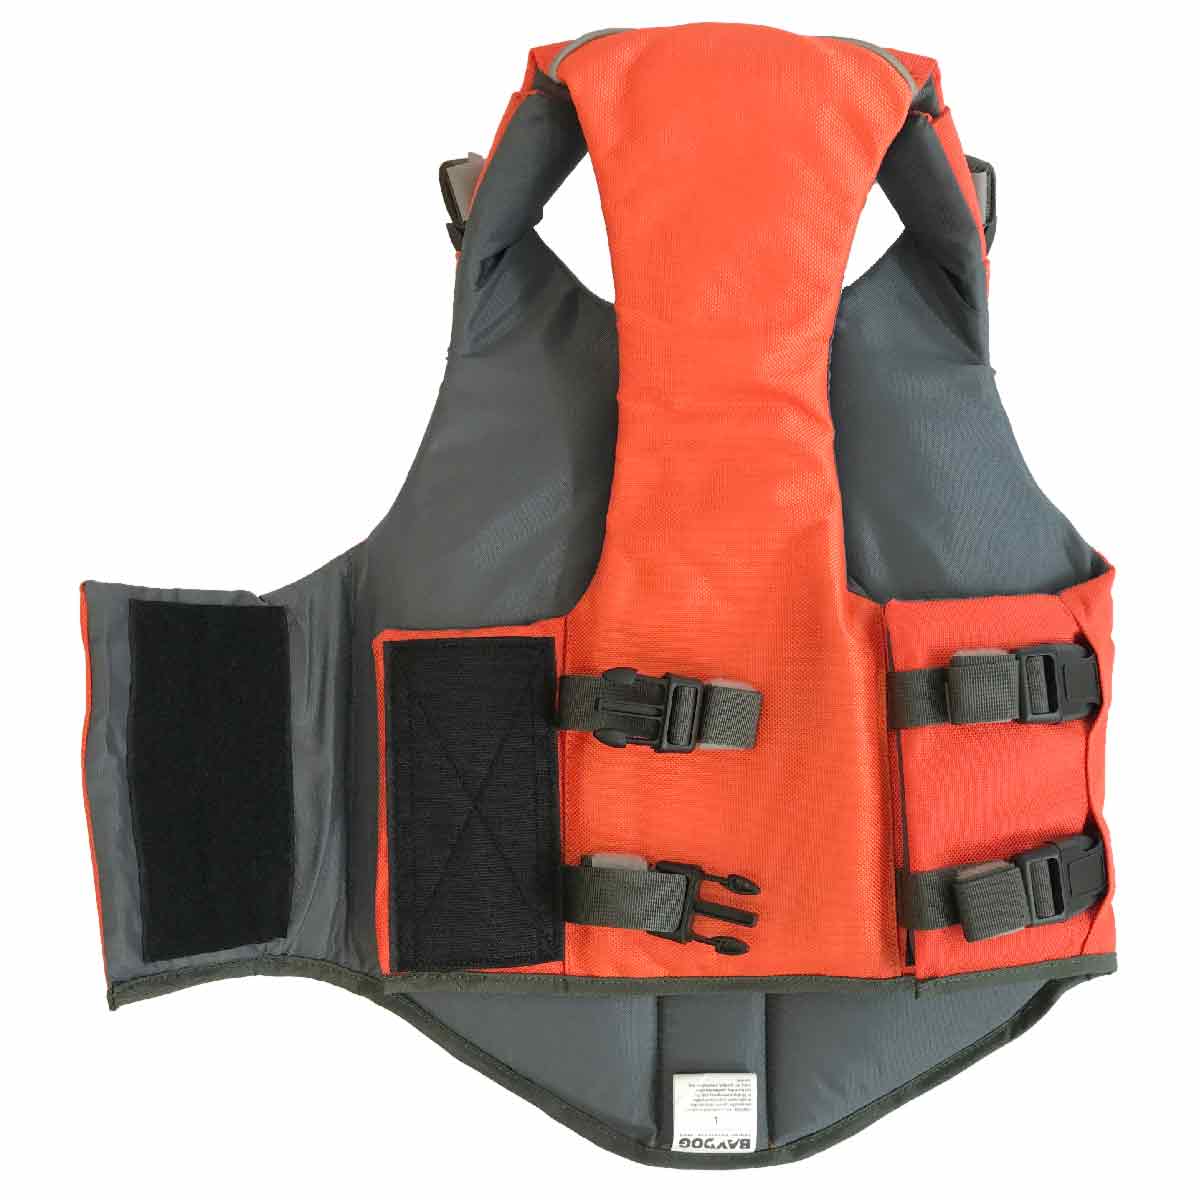 Baydog MOnterey Bay life jacket for dogs back detail view showing closure and straps.